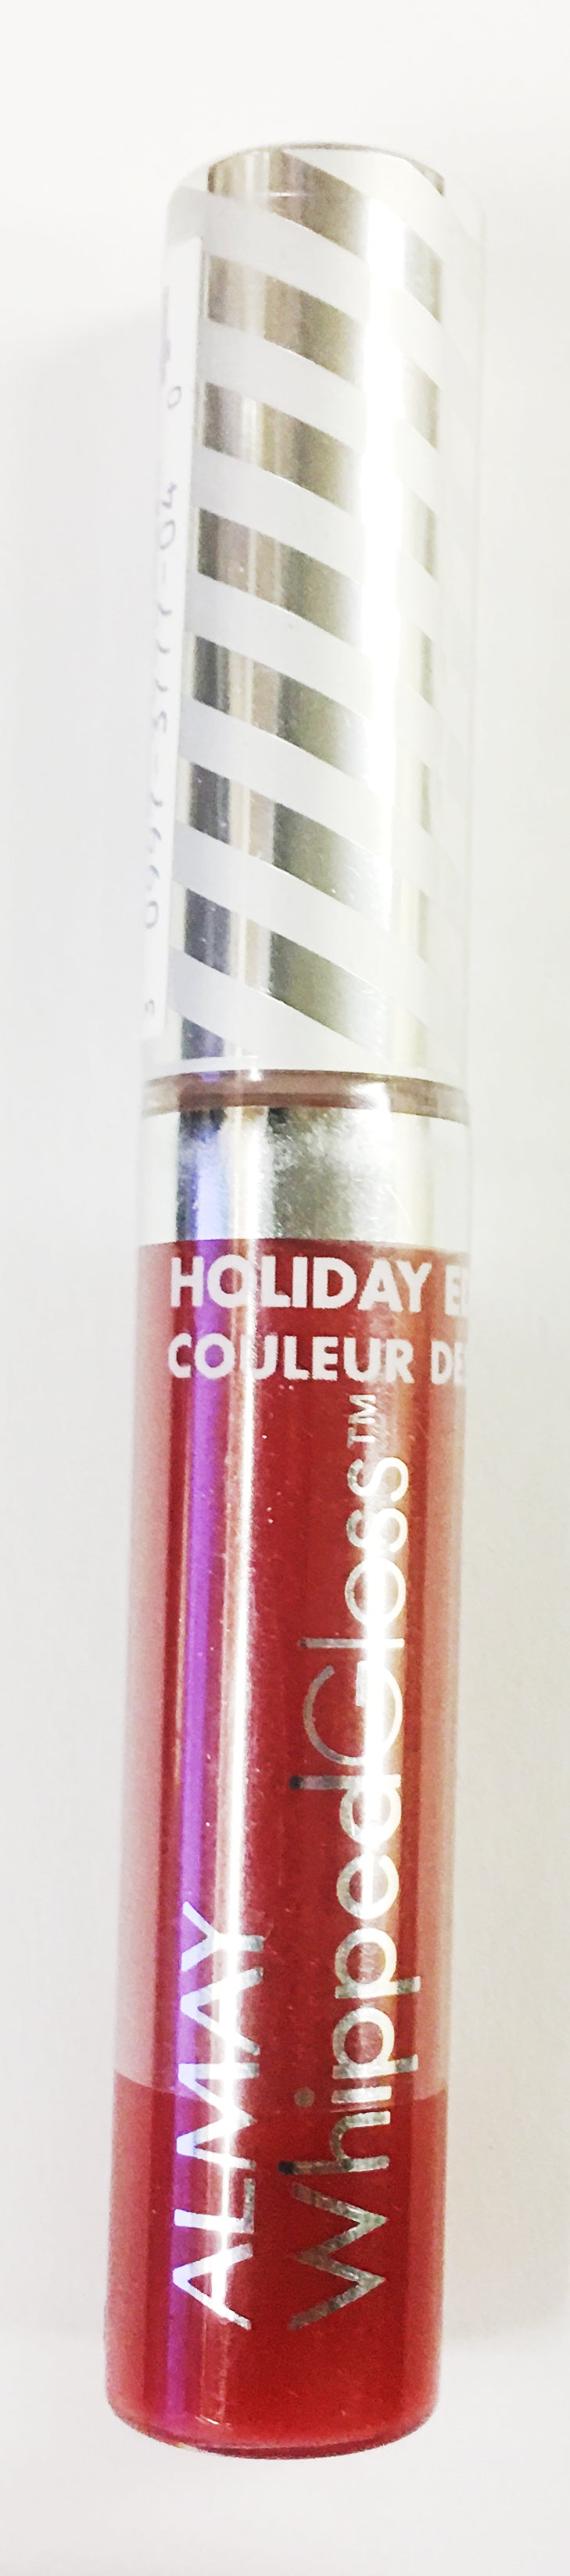 ALMAY Whipped Lipgloss - Merry Cherry 04 - ADDROS.COM